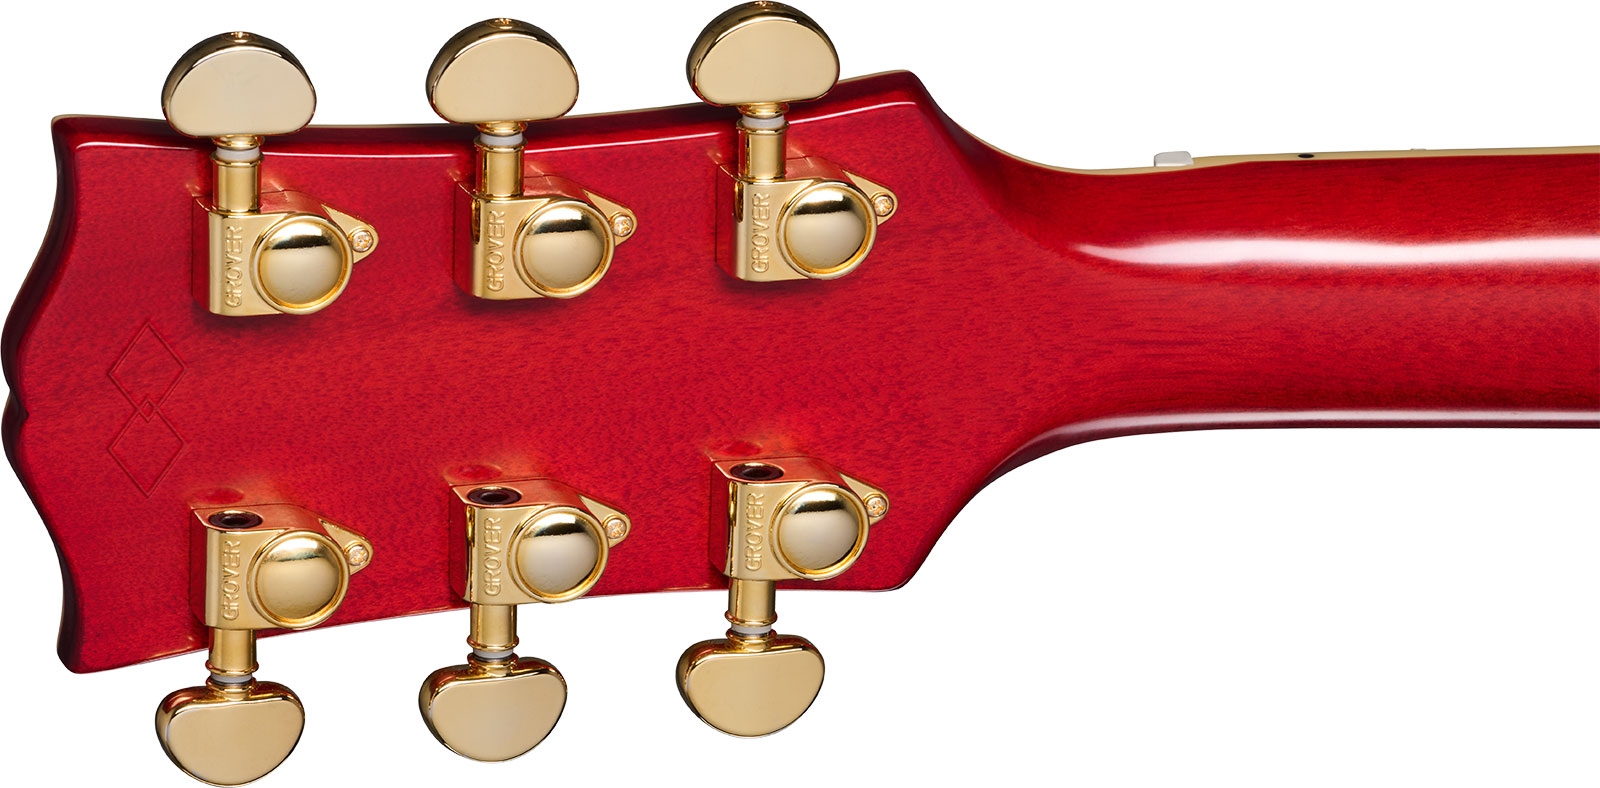 Epiphone Es355 1959 Inspired By 2h Gibson Ht Eb - Vos Cherry Red - Semi-Hollow E-Gitarre - Variation 4